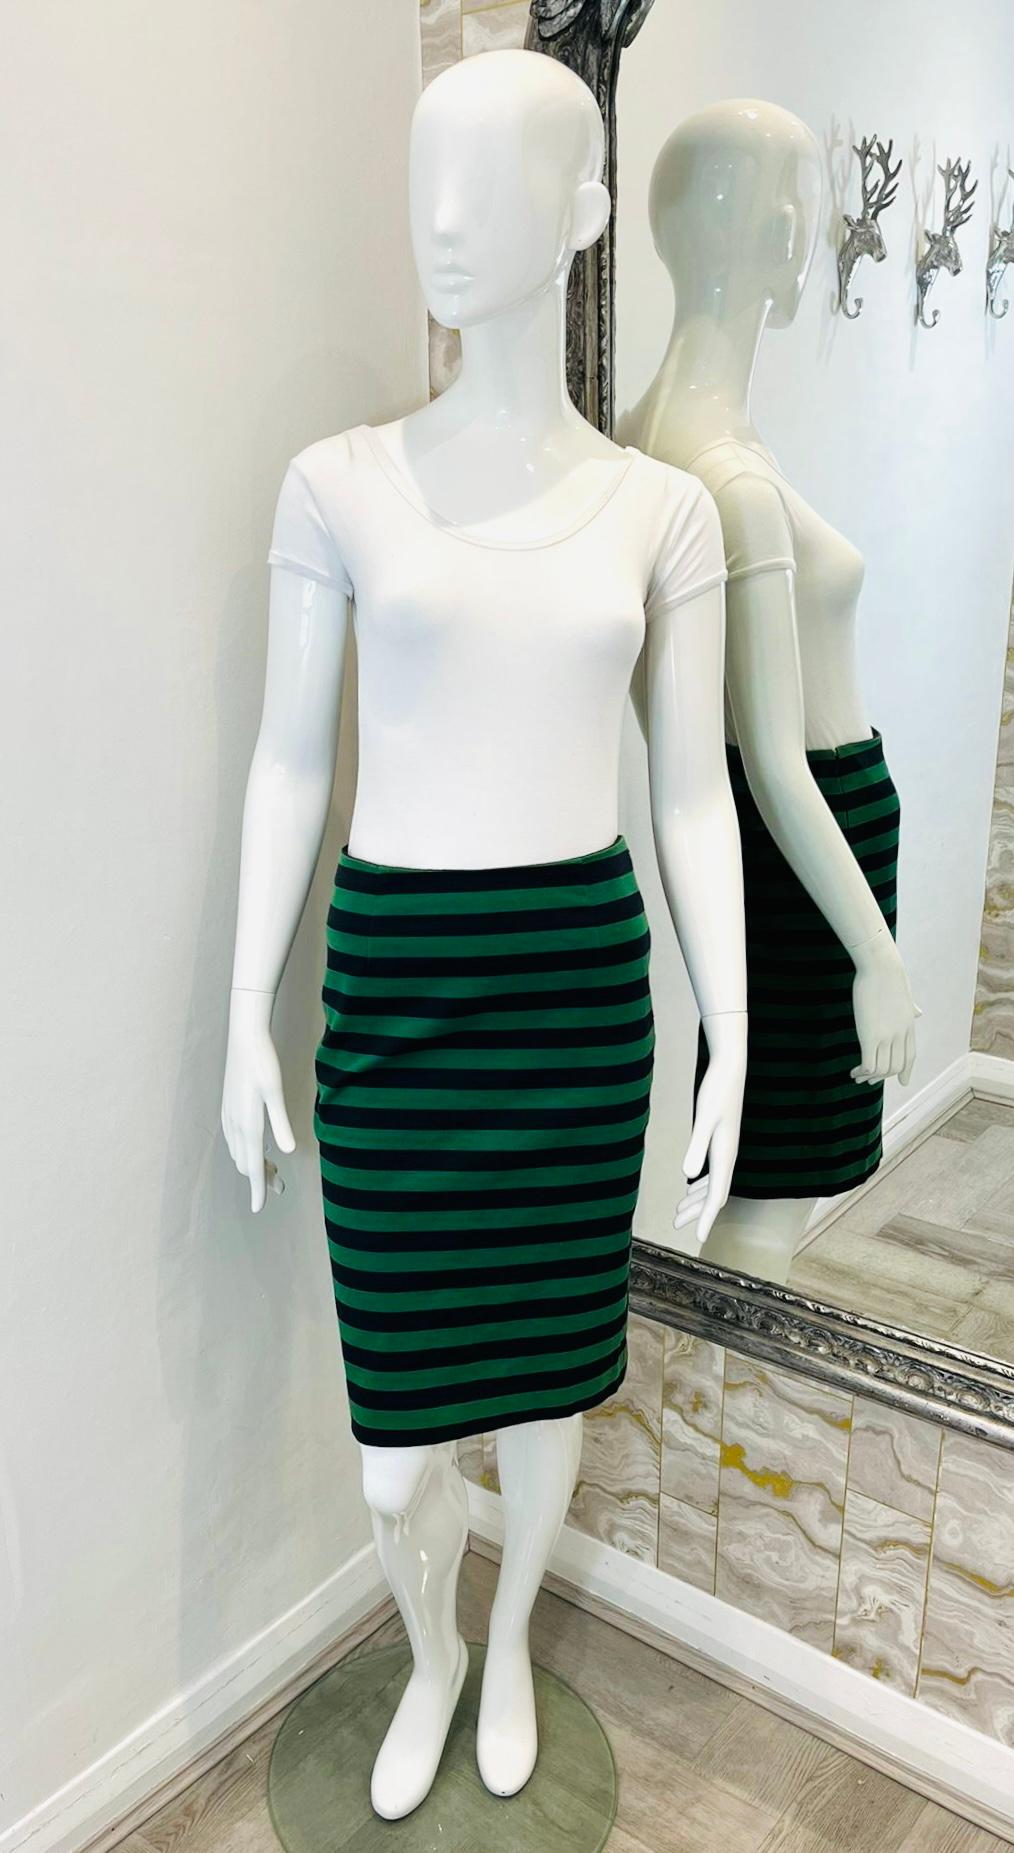 Prada Runway Striped Pencil Skirt

From The 2011 Runway Collection - Green & black skirt designed with striped pattern.

Featuring stretchy, bodycon fit and above-the-knee length.

(Matching top on another listing)

Size – S (Label missing but